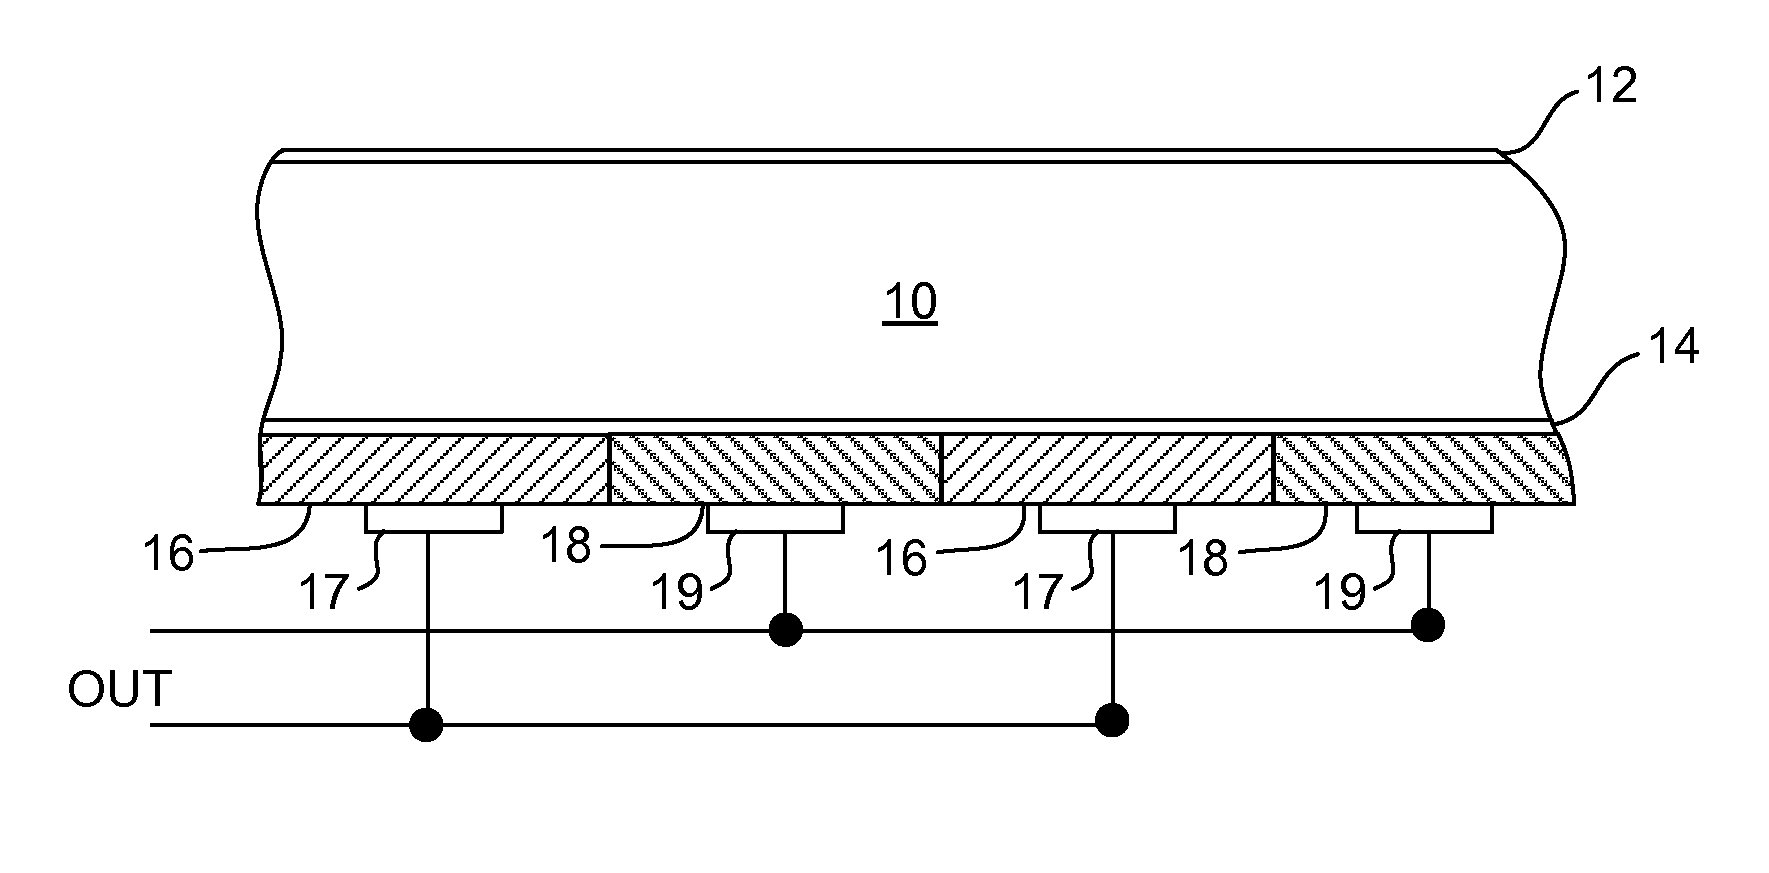 Solar cell having silicon nano-particle emitter